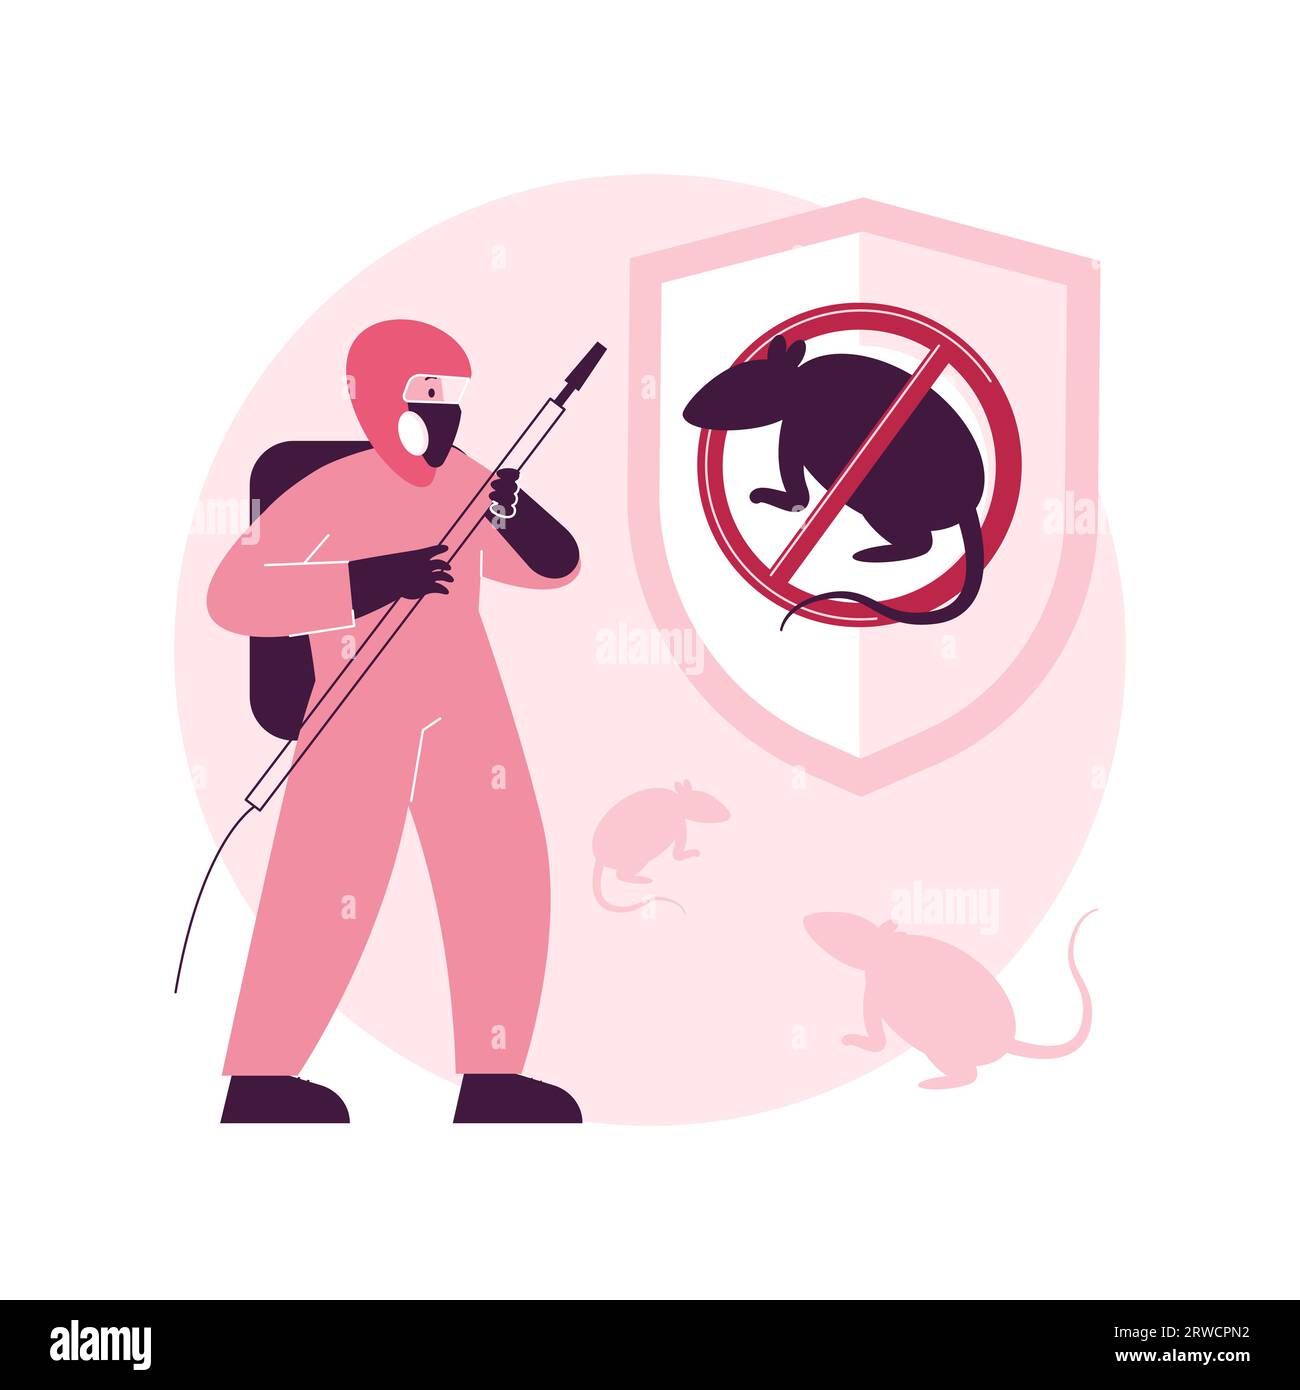 Rodents pest control service abstract concept vector illustration. Rodent control service, house proofing, rats trapping program, mice exterminator, 24 hour pest removal abstract metaphor. Stock Vector